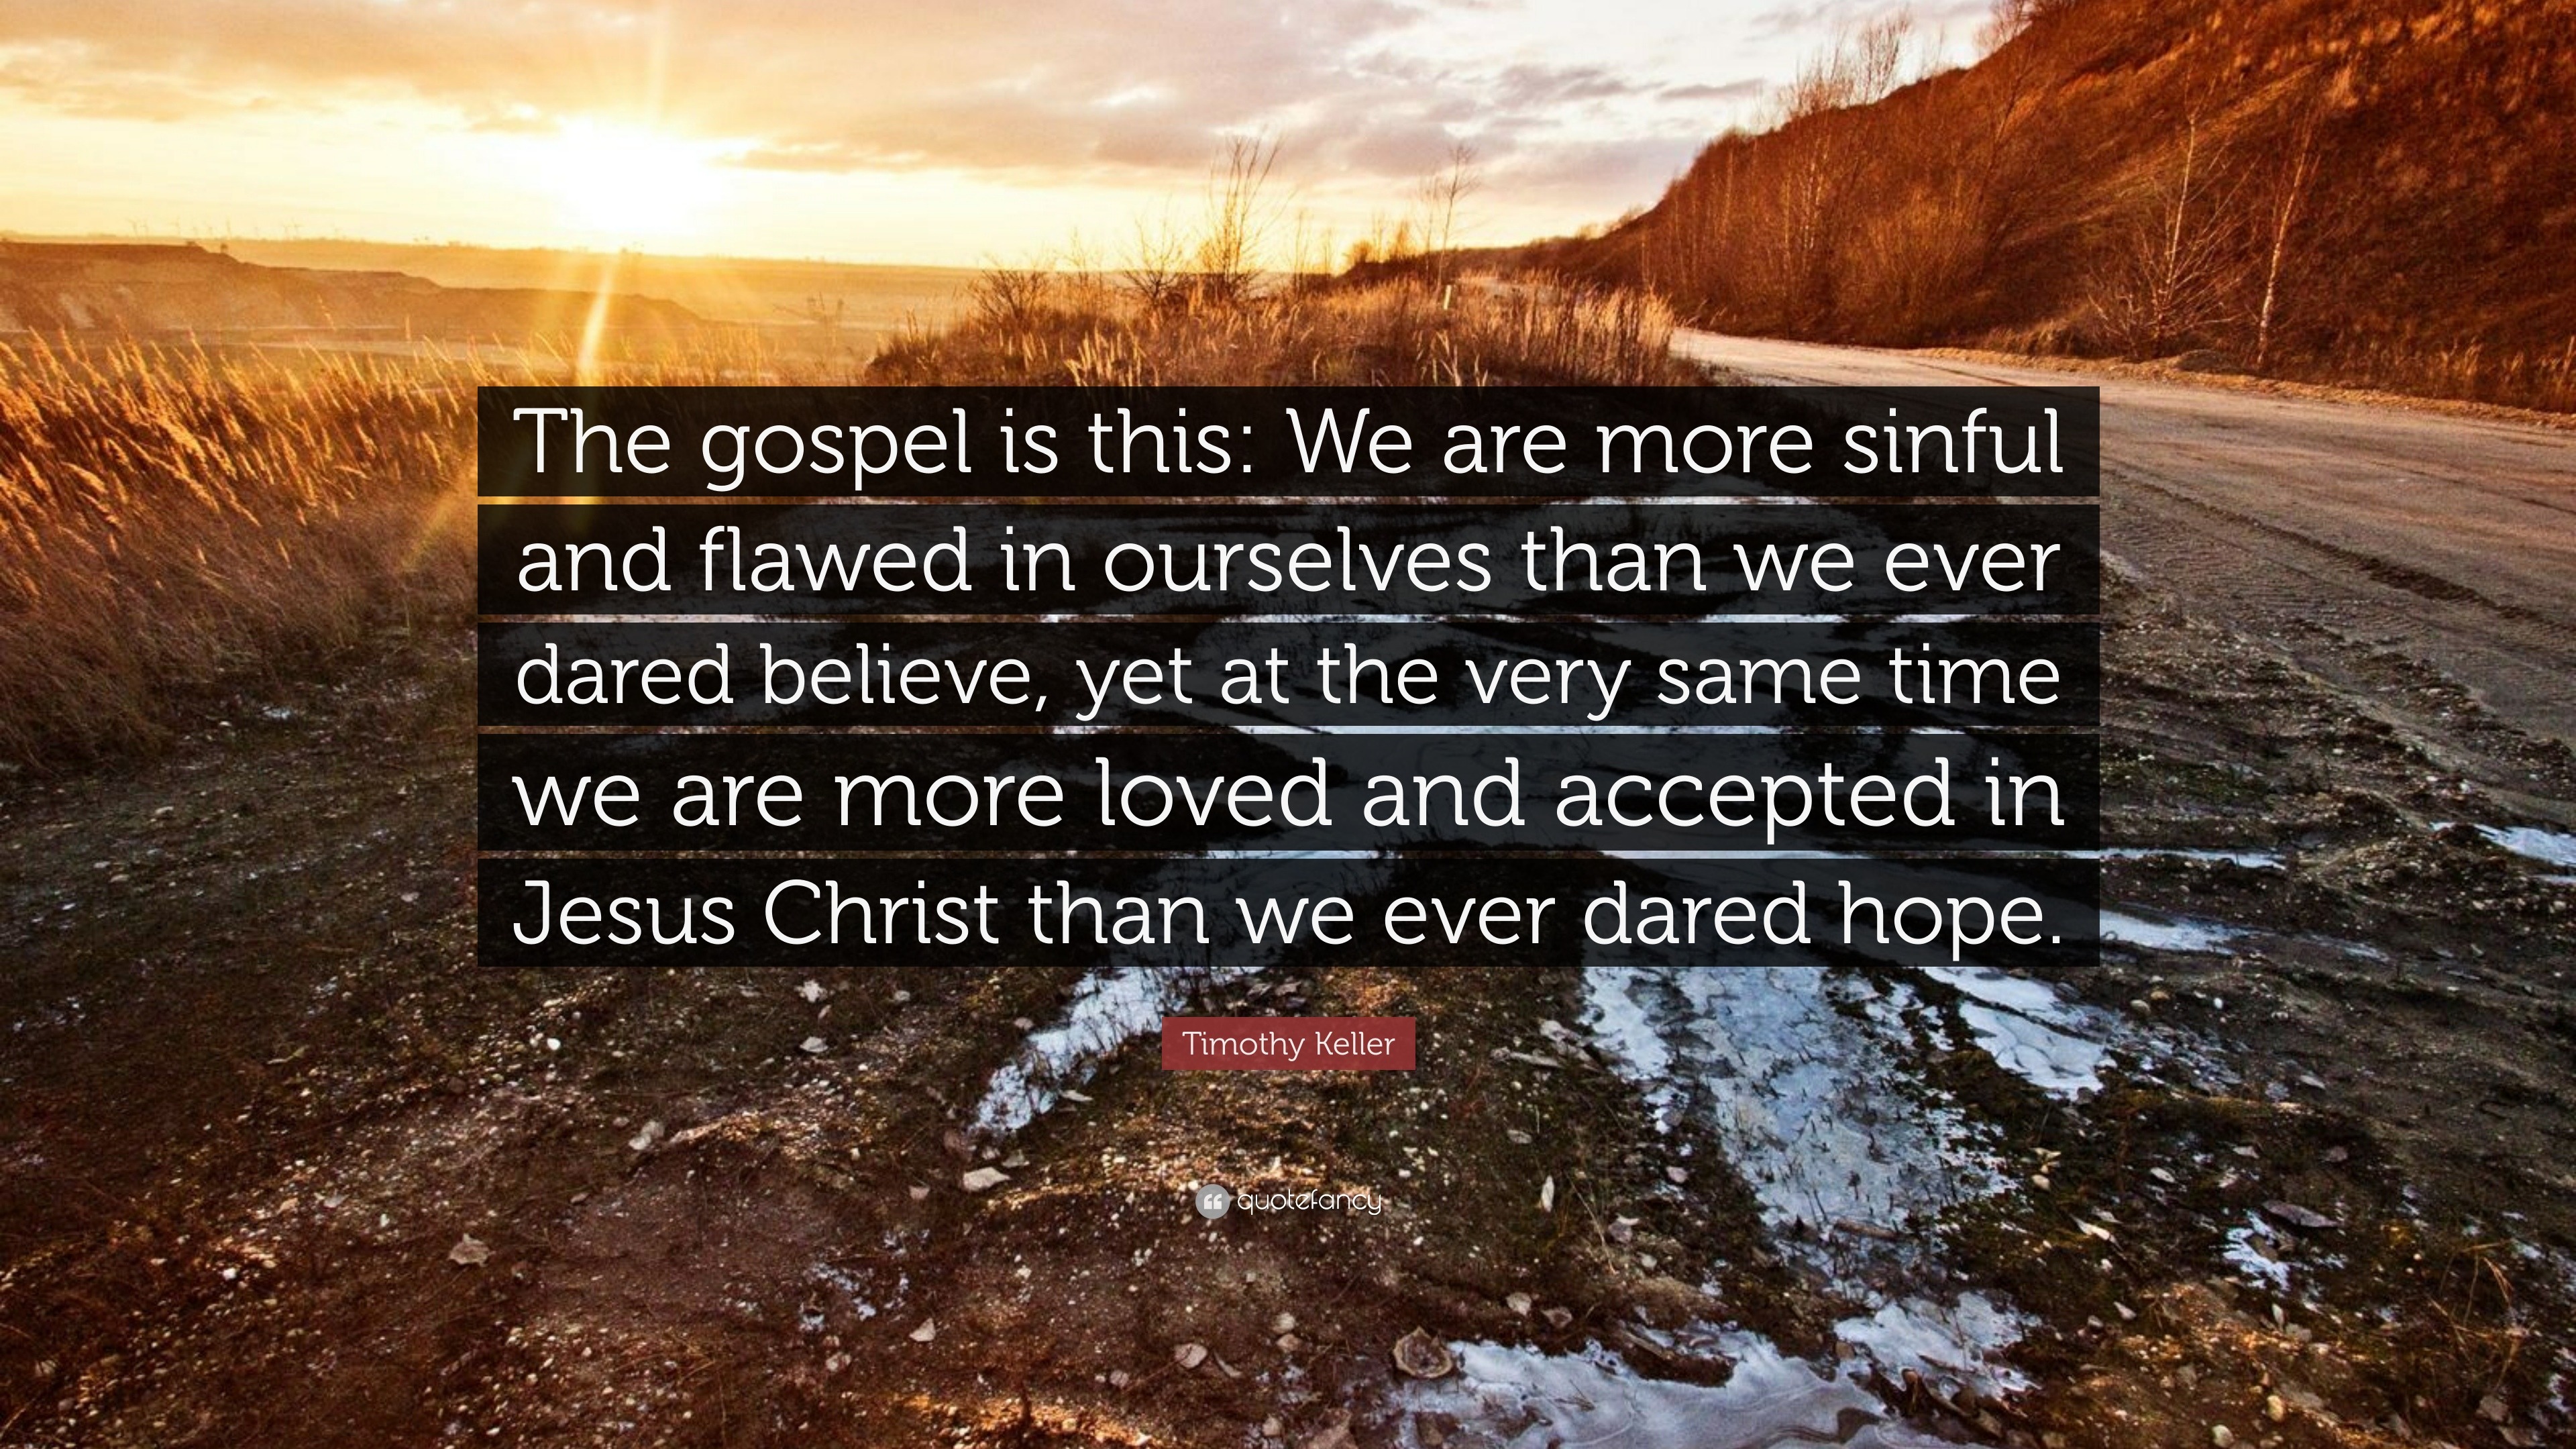 Timothy Keller Quote “The gospel is this We are more sinful and